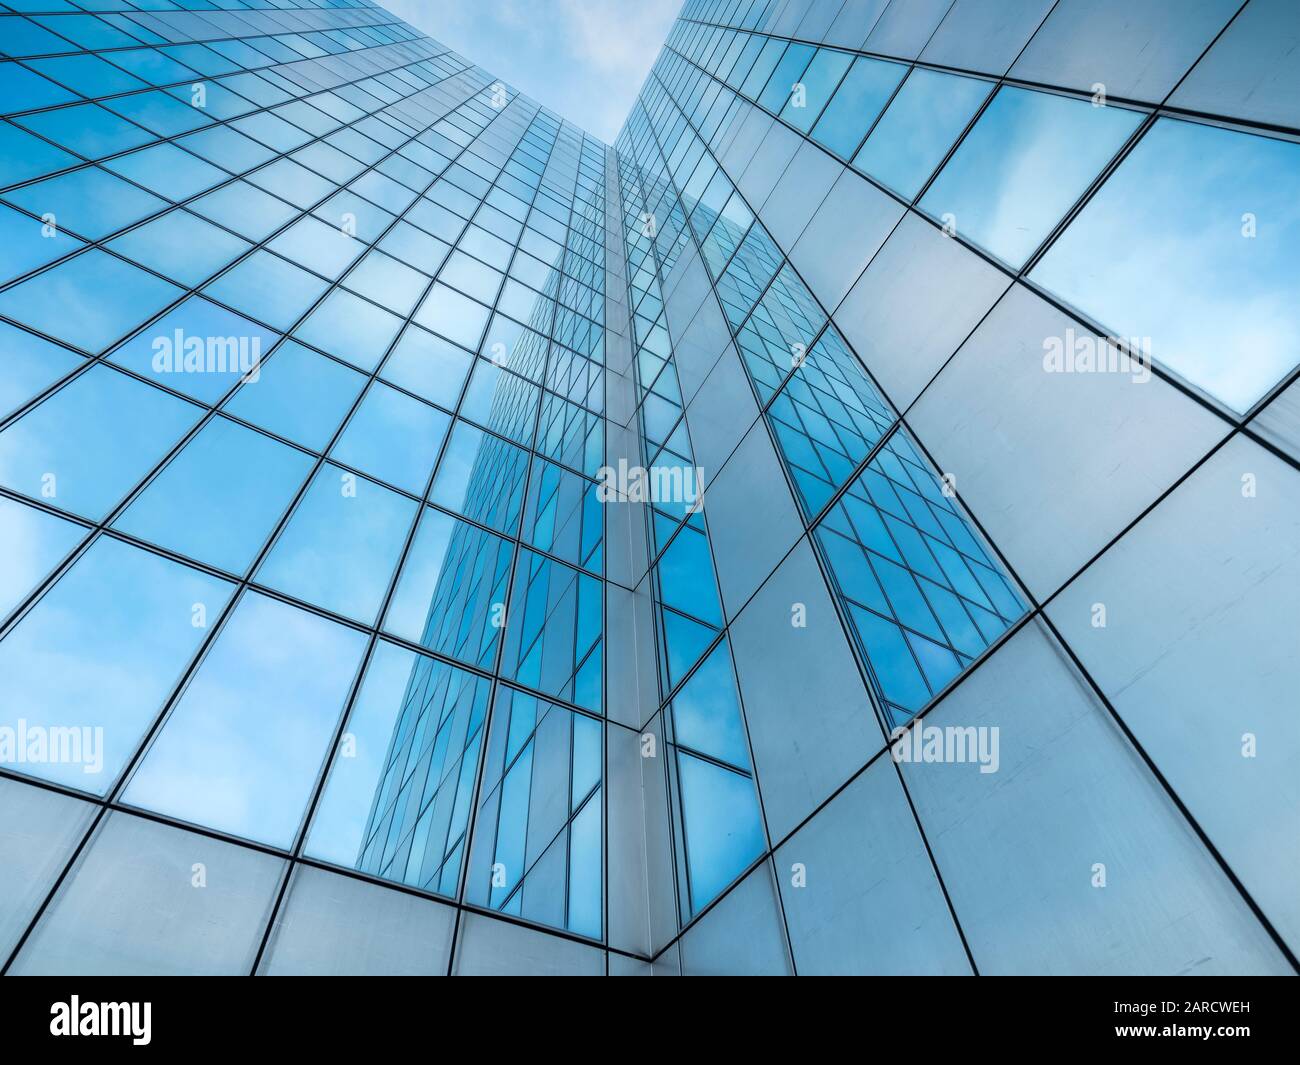 glass facades of modern office buildings and reflection of blue sky Stock Photo